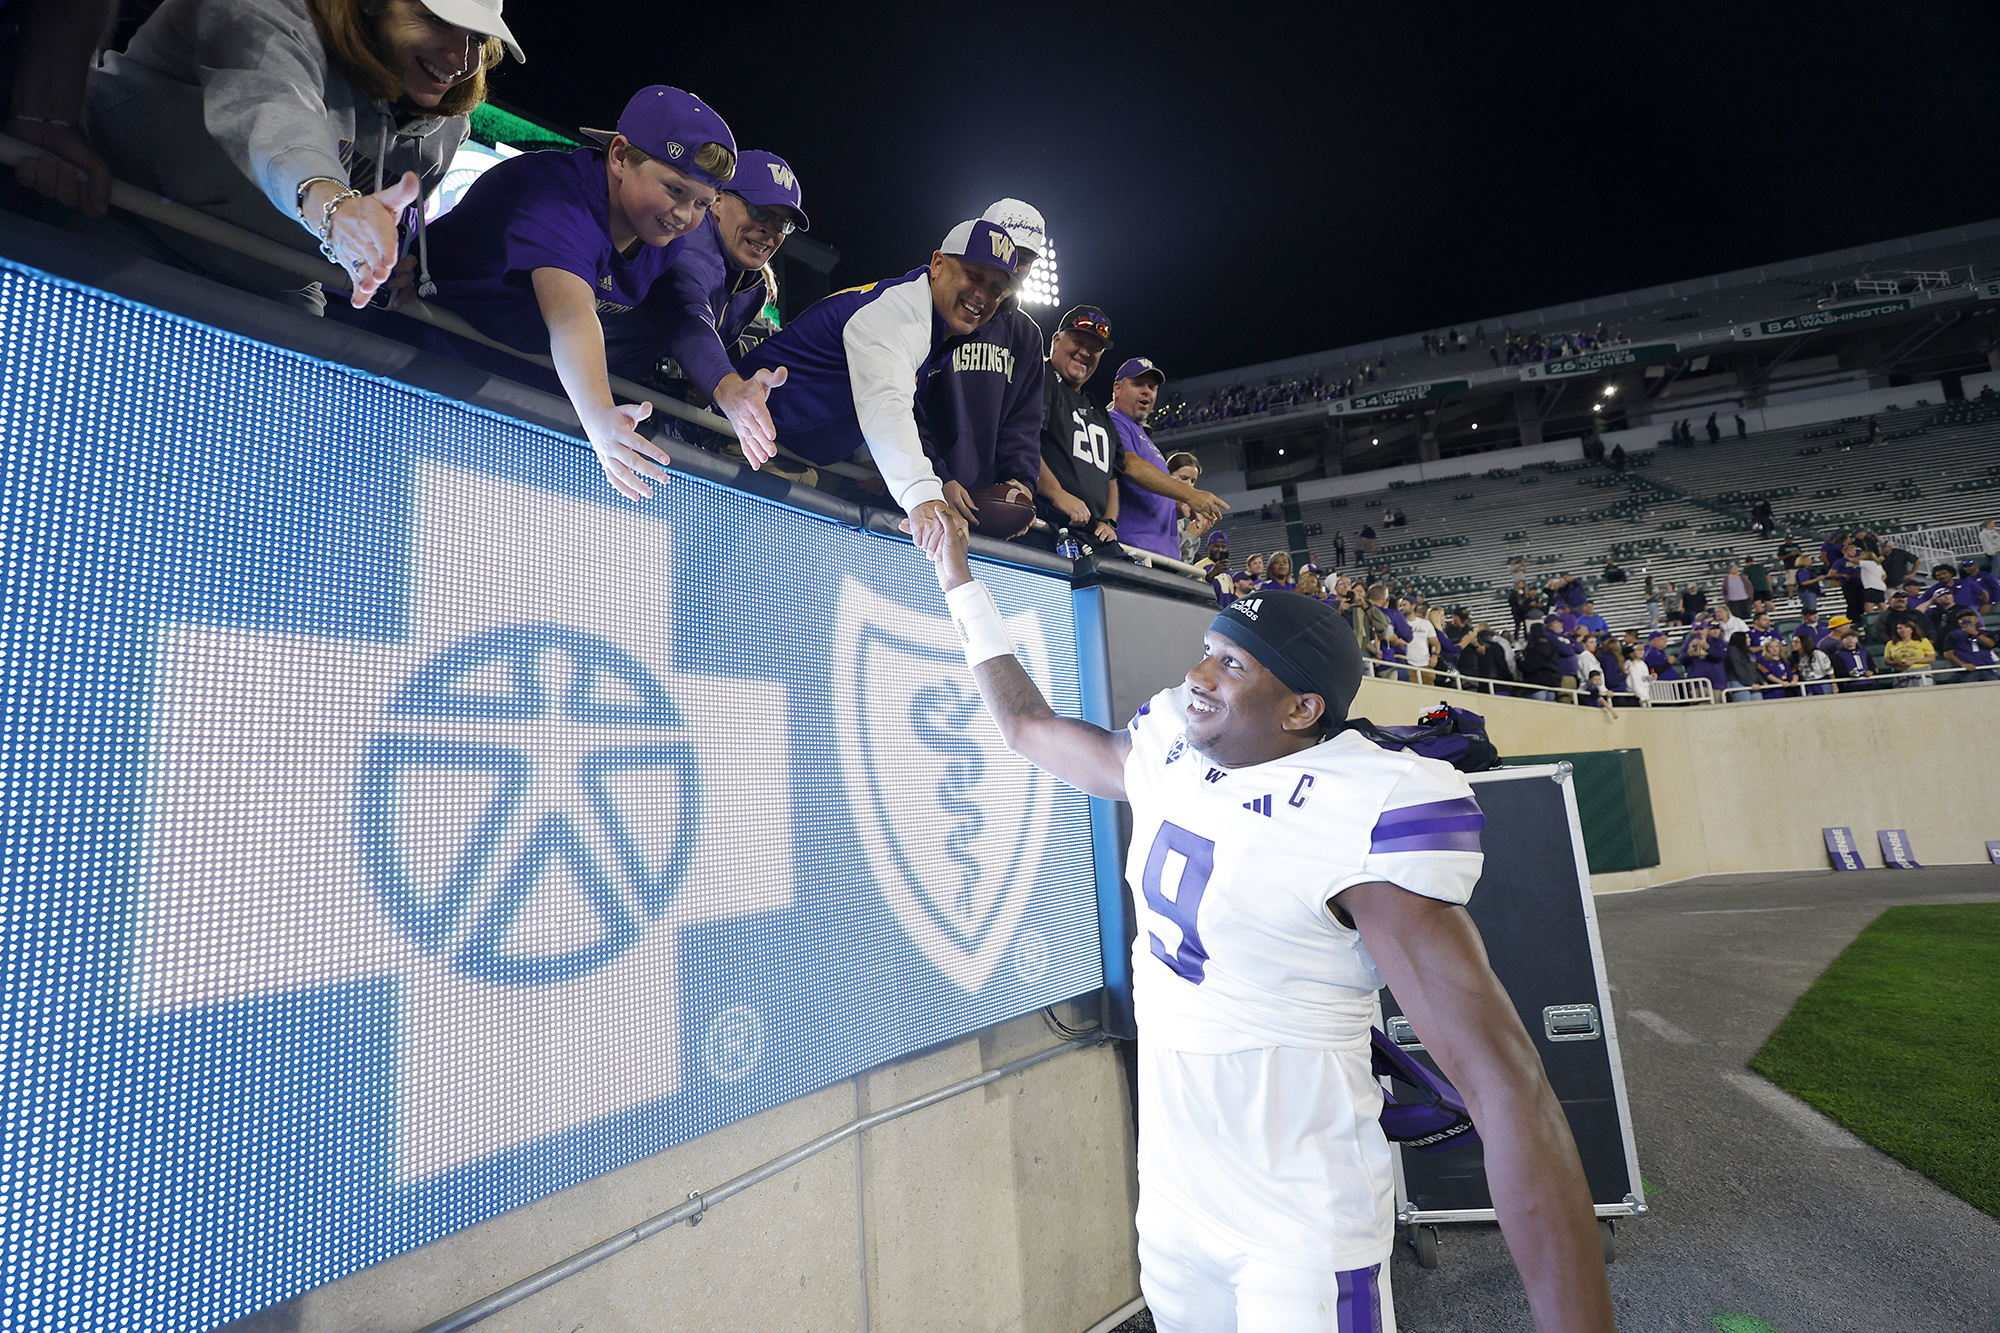 Washington's Michael Penix Jr. greets fans following an NCAA college football game against Michigan State, Saturday, Sept. 16, 2023, in East Lansing, Mich. Washington won 41-7.